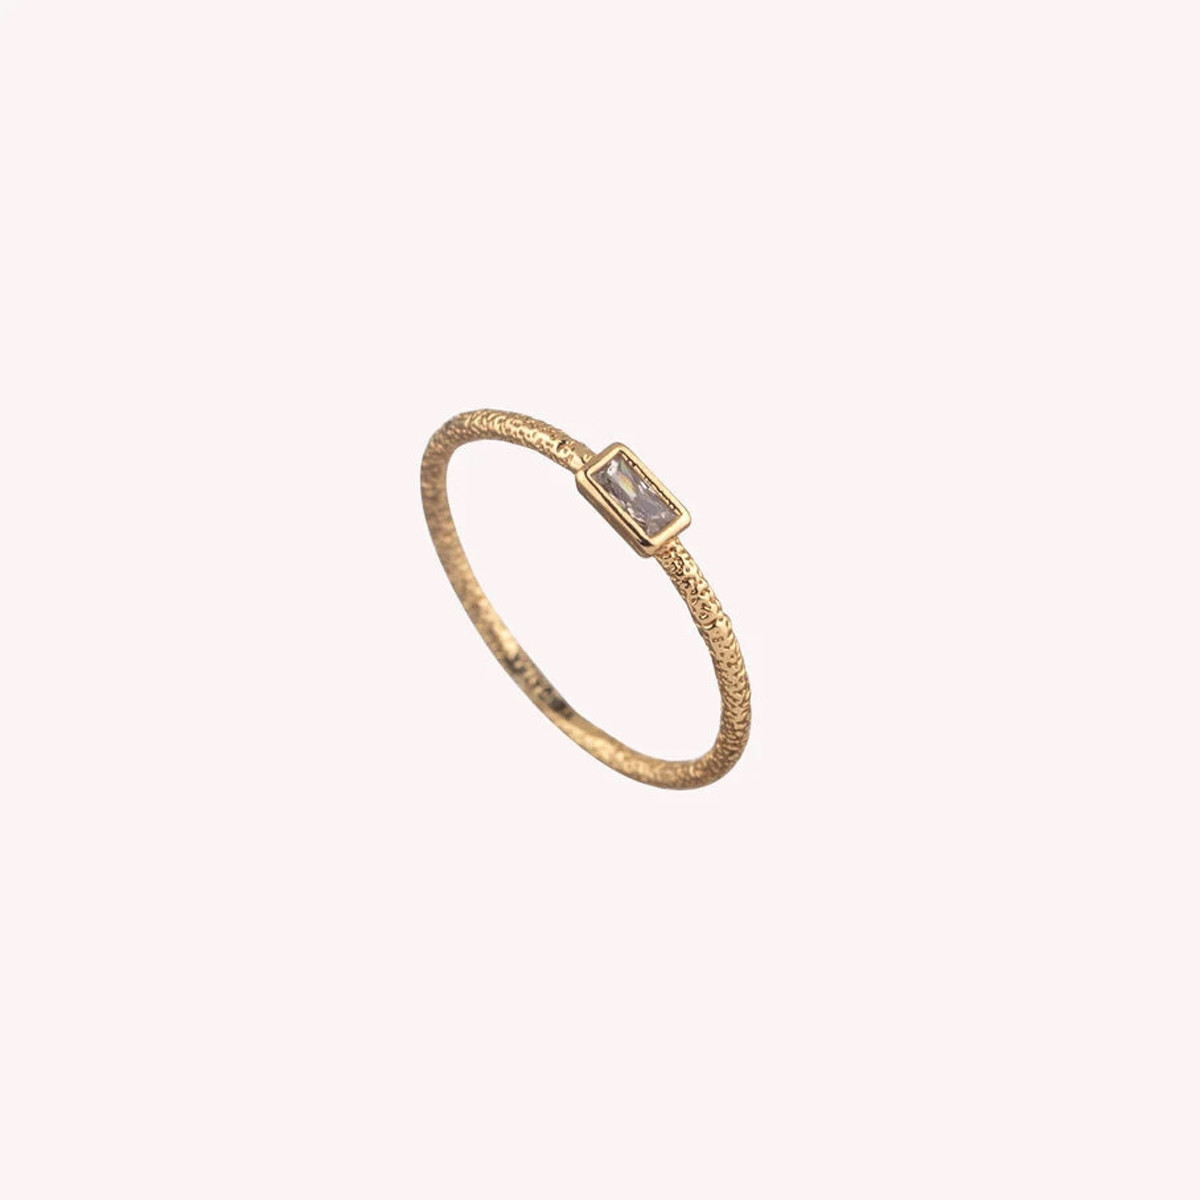 FINE CLEOPATR CRYSTAL / GOLD PLATED RING